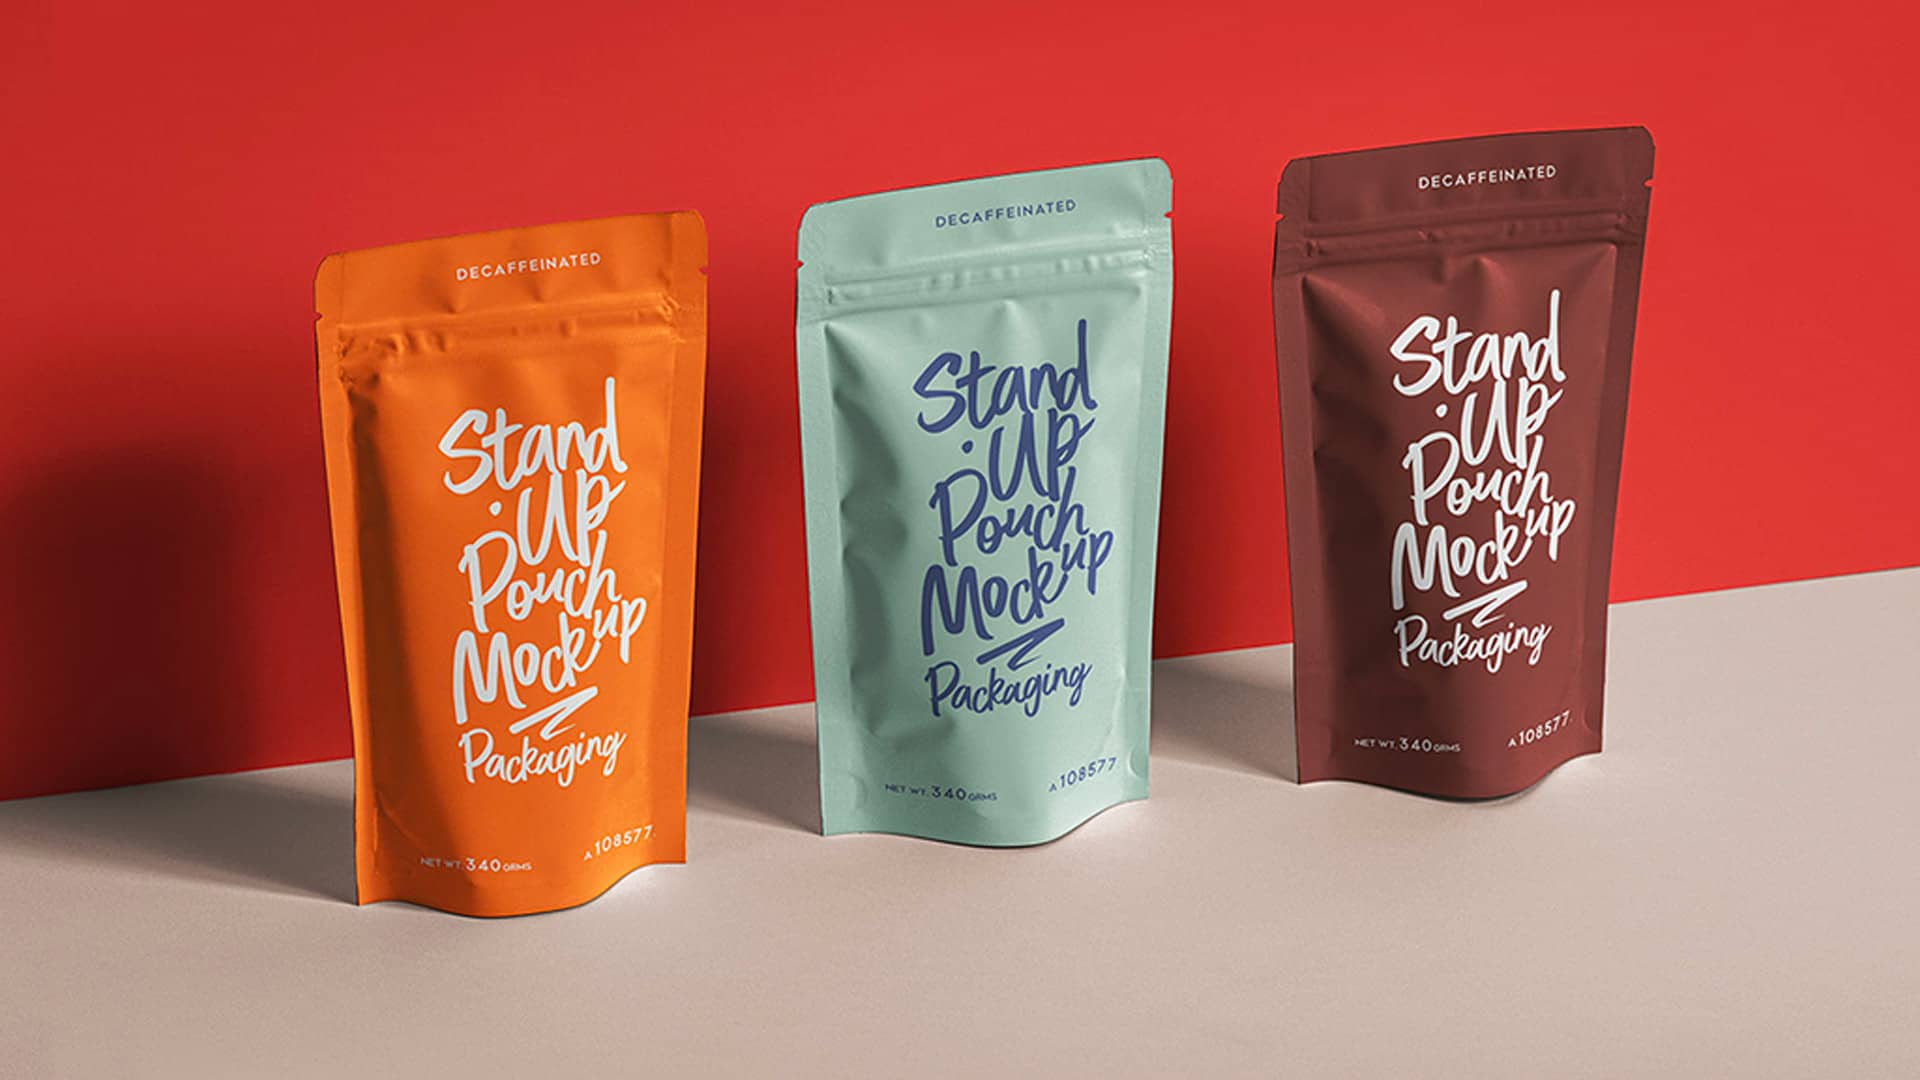 Mockup packaging. Stand up Pouch мокап. Мокапы упаковки. Mock up упаковка. Упаковка мармелад мокап.